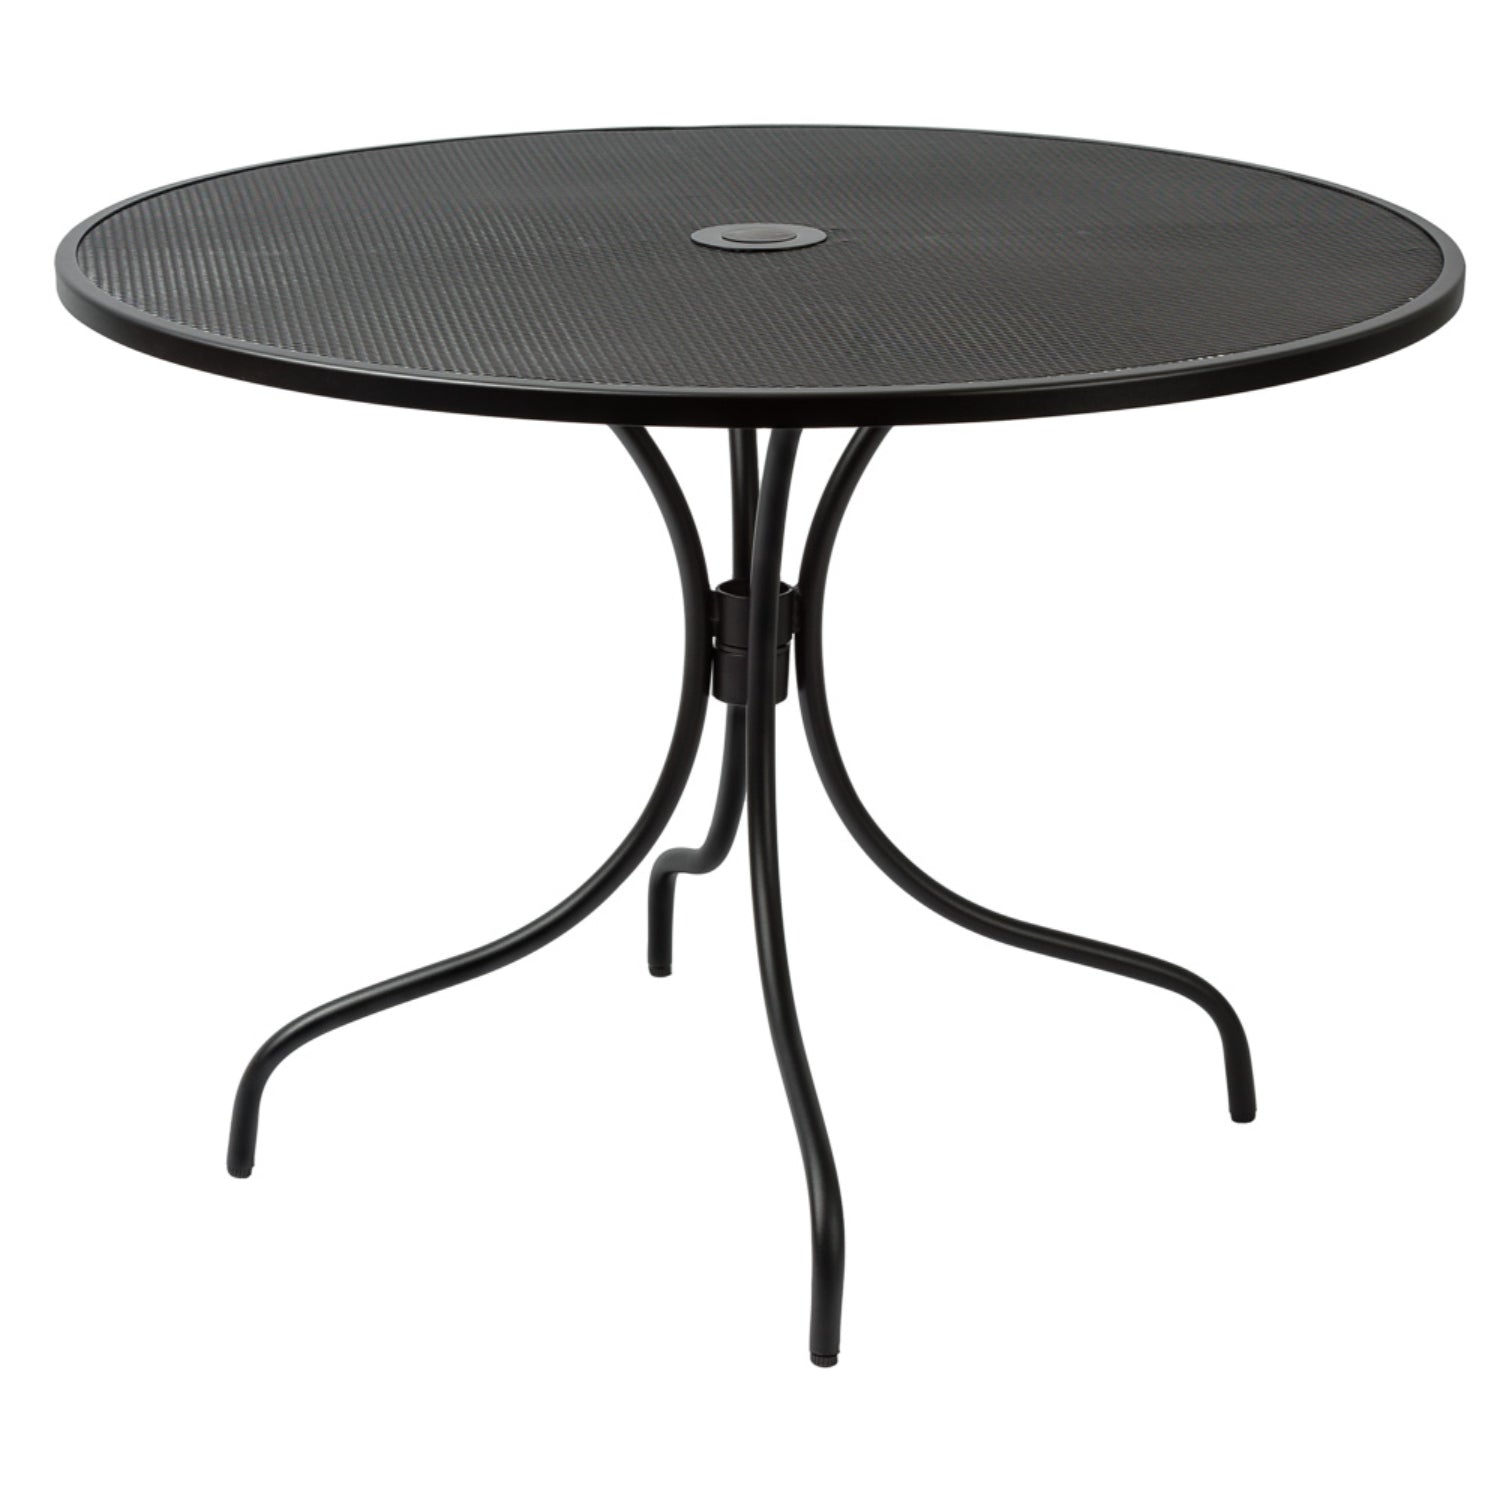 Barnegat Collection Outdoor/Indoor Black Steel 42" Round Dining Height Table with Umbrella Hole